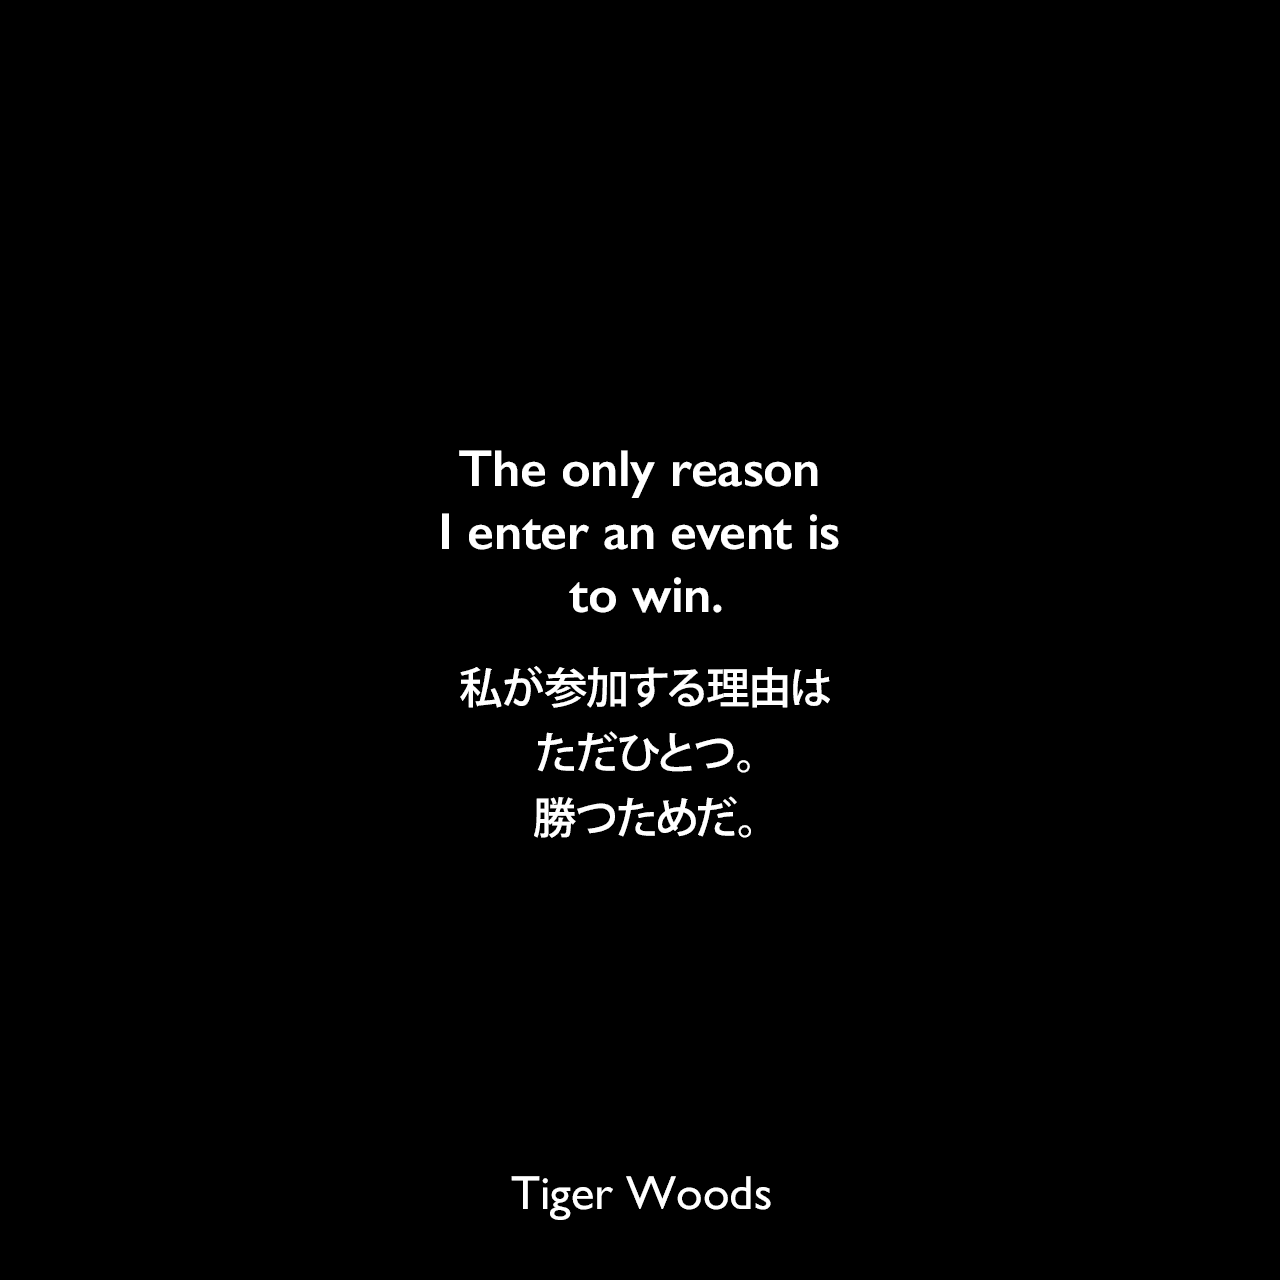 The only reason I enter an event is to win.私が参加する理由はただひとつ。勝つためだ。Tiger Woods